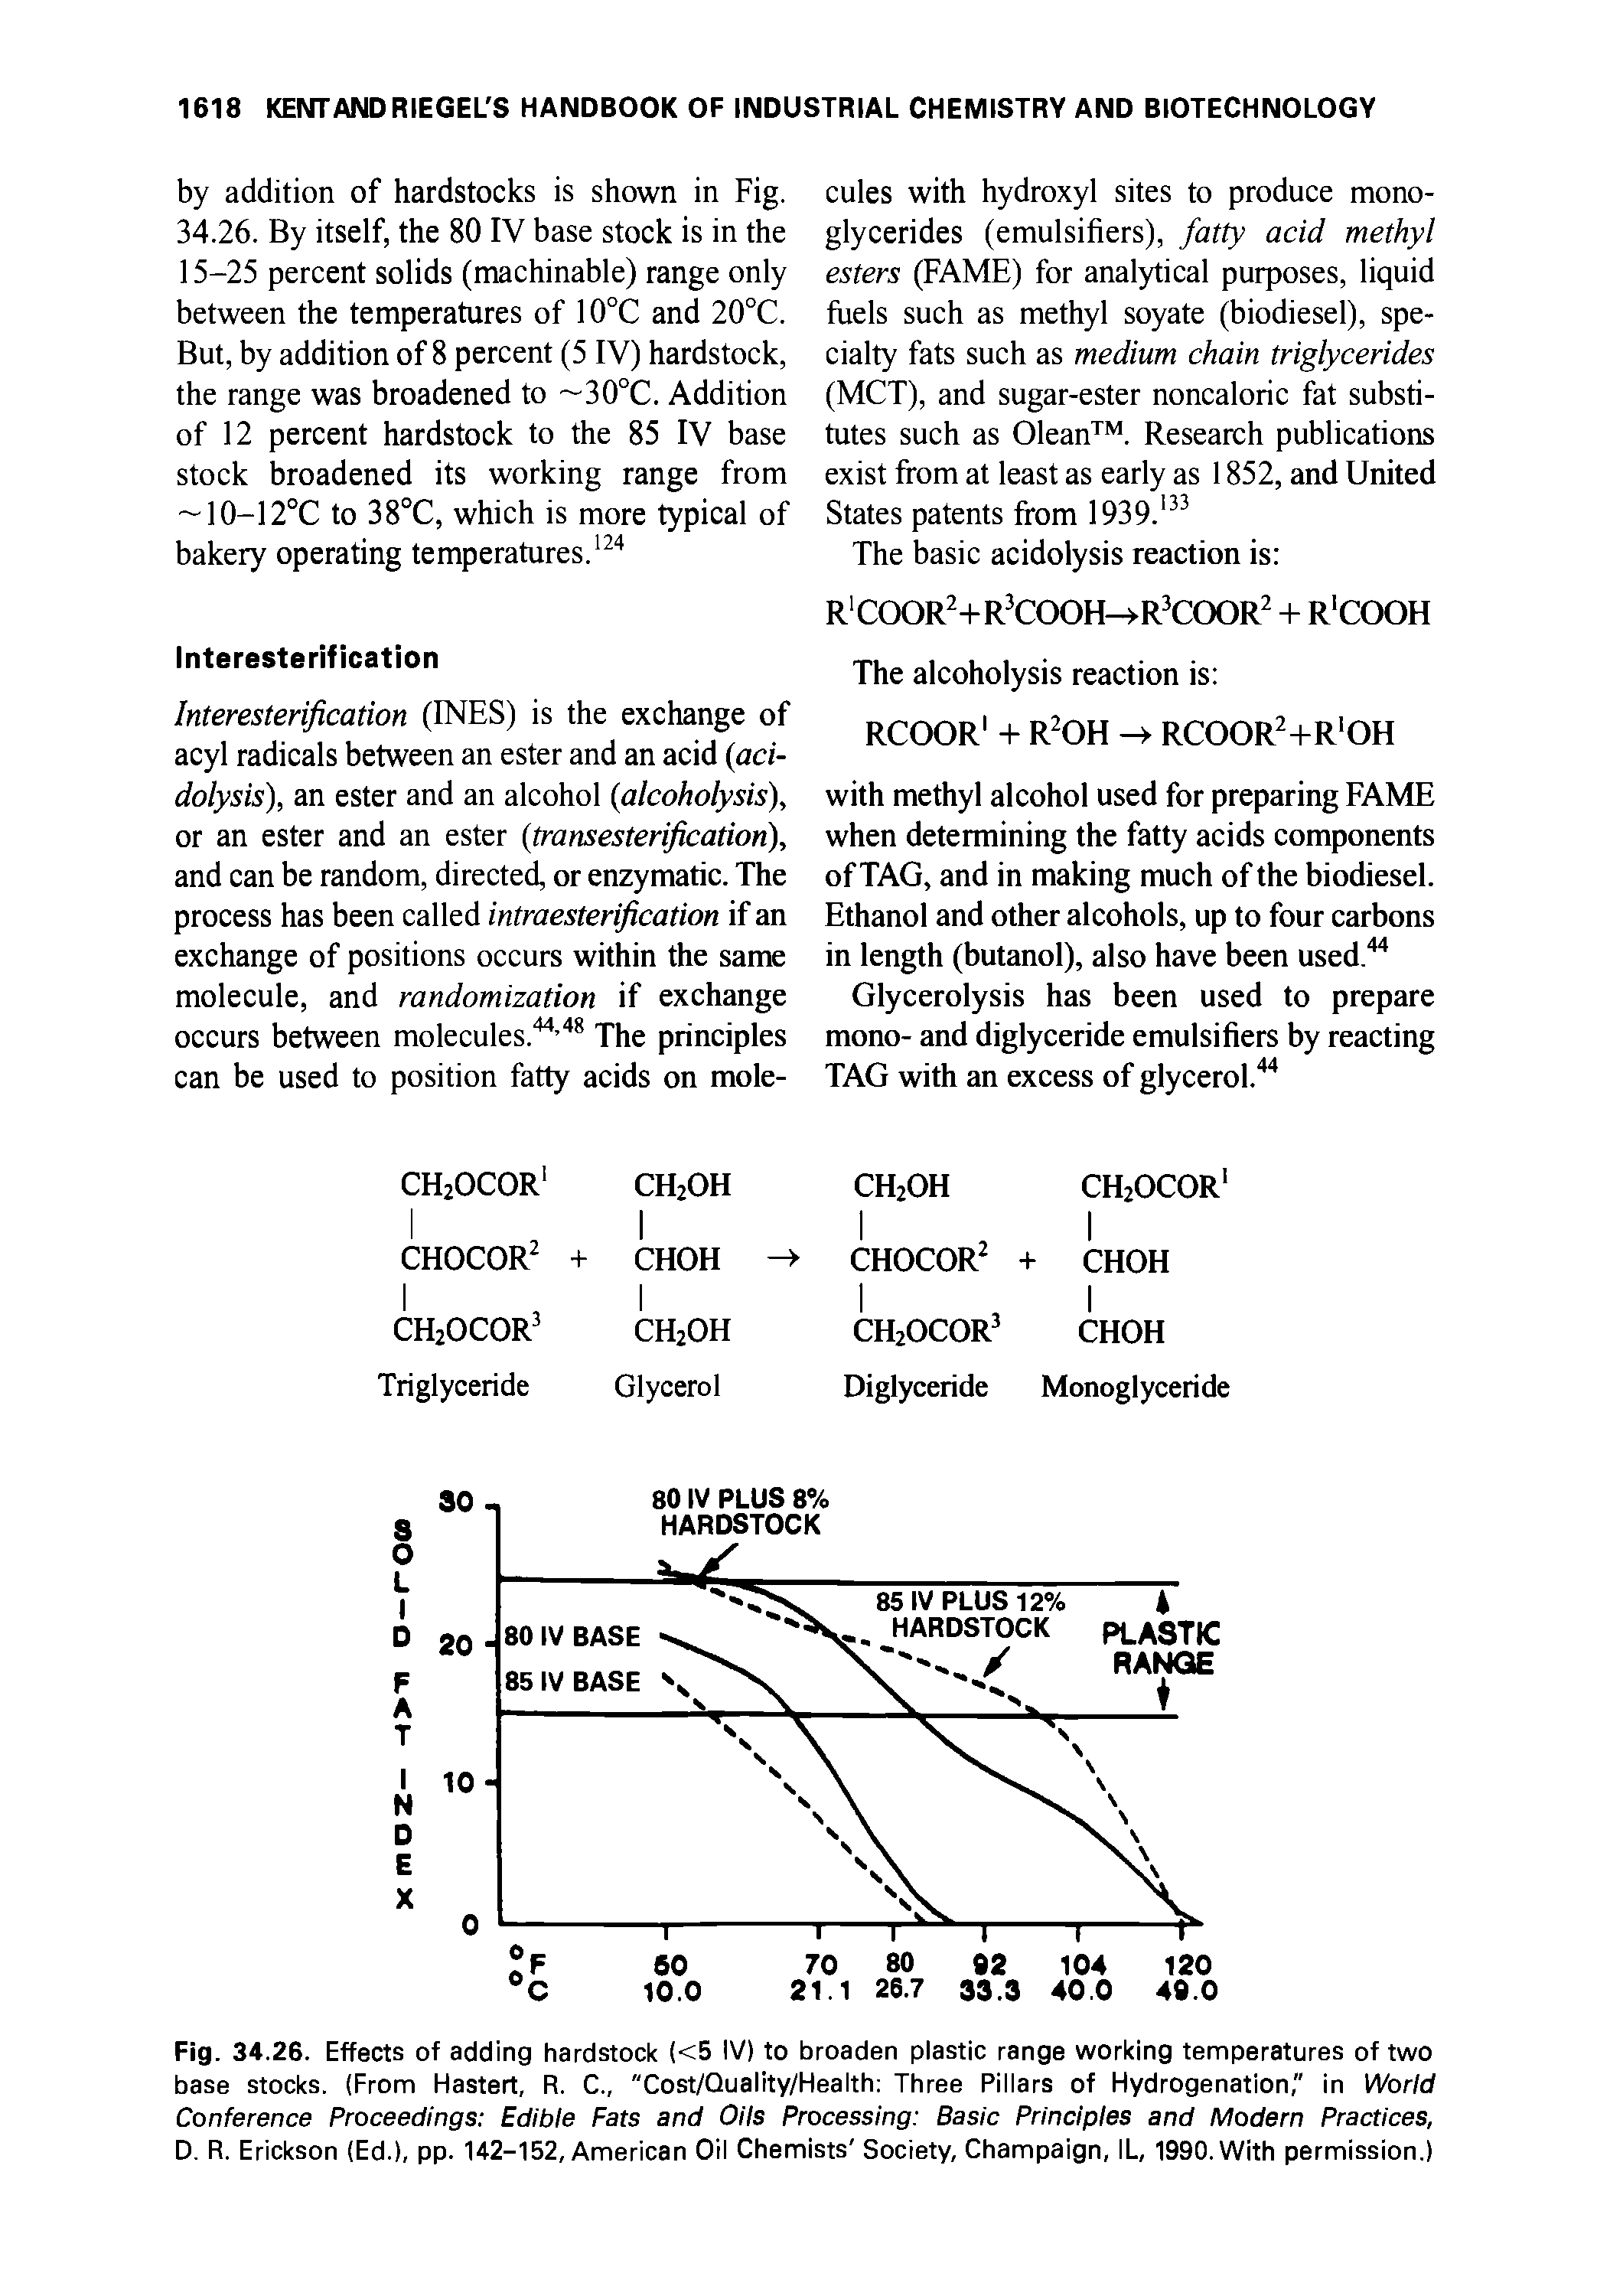 Fig. 34.26. Effects of adding hardstock (<5 IV) to broaden plastic range working temperatures of two base stocks. (From Hastert, R. C., "Cost/Quality/Health Three Pillars of Hydrogenation," in World Conference Proceedings Edible Fats and Oils Processing Basic Principles and Modern Practices, D. R. Erickson (Ed.), pp. 142-152, American Oil Chemists Society, Champaign, IL, 1990. With permission.)...